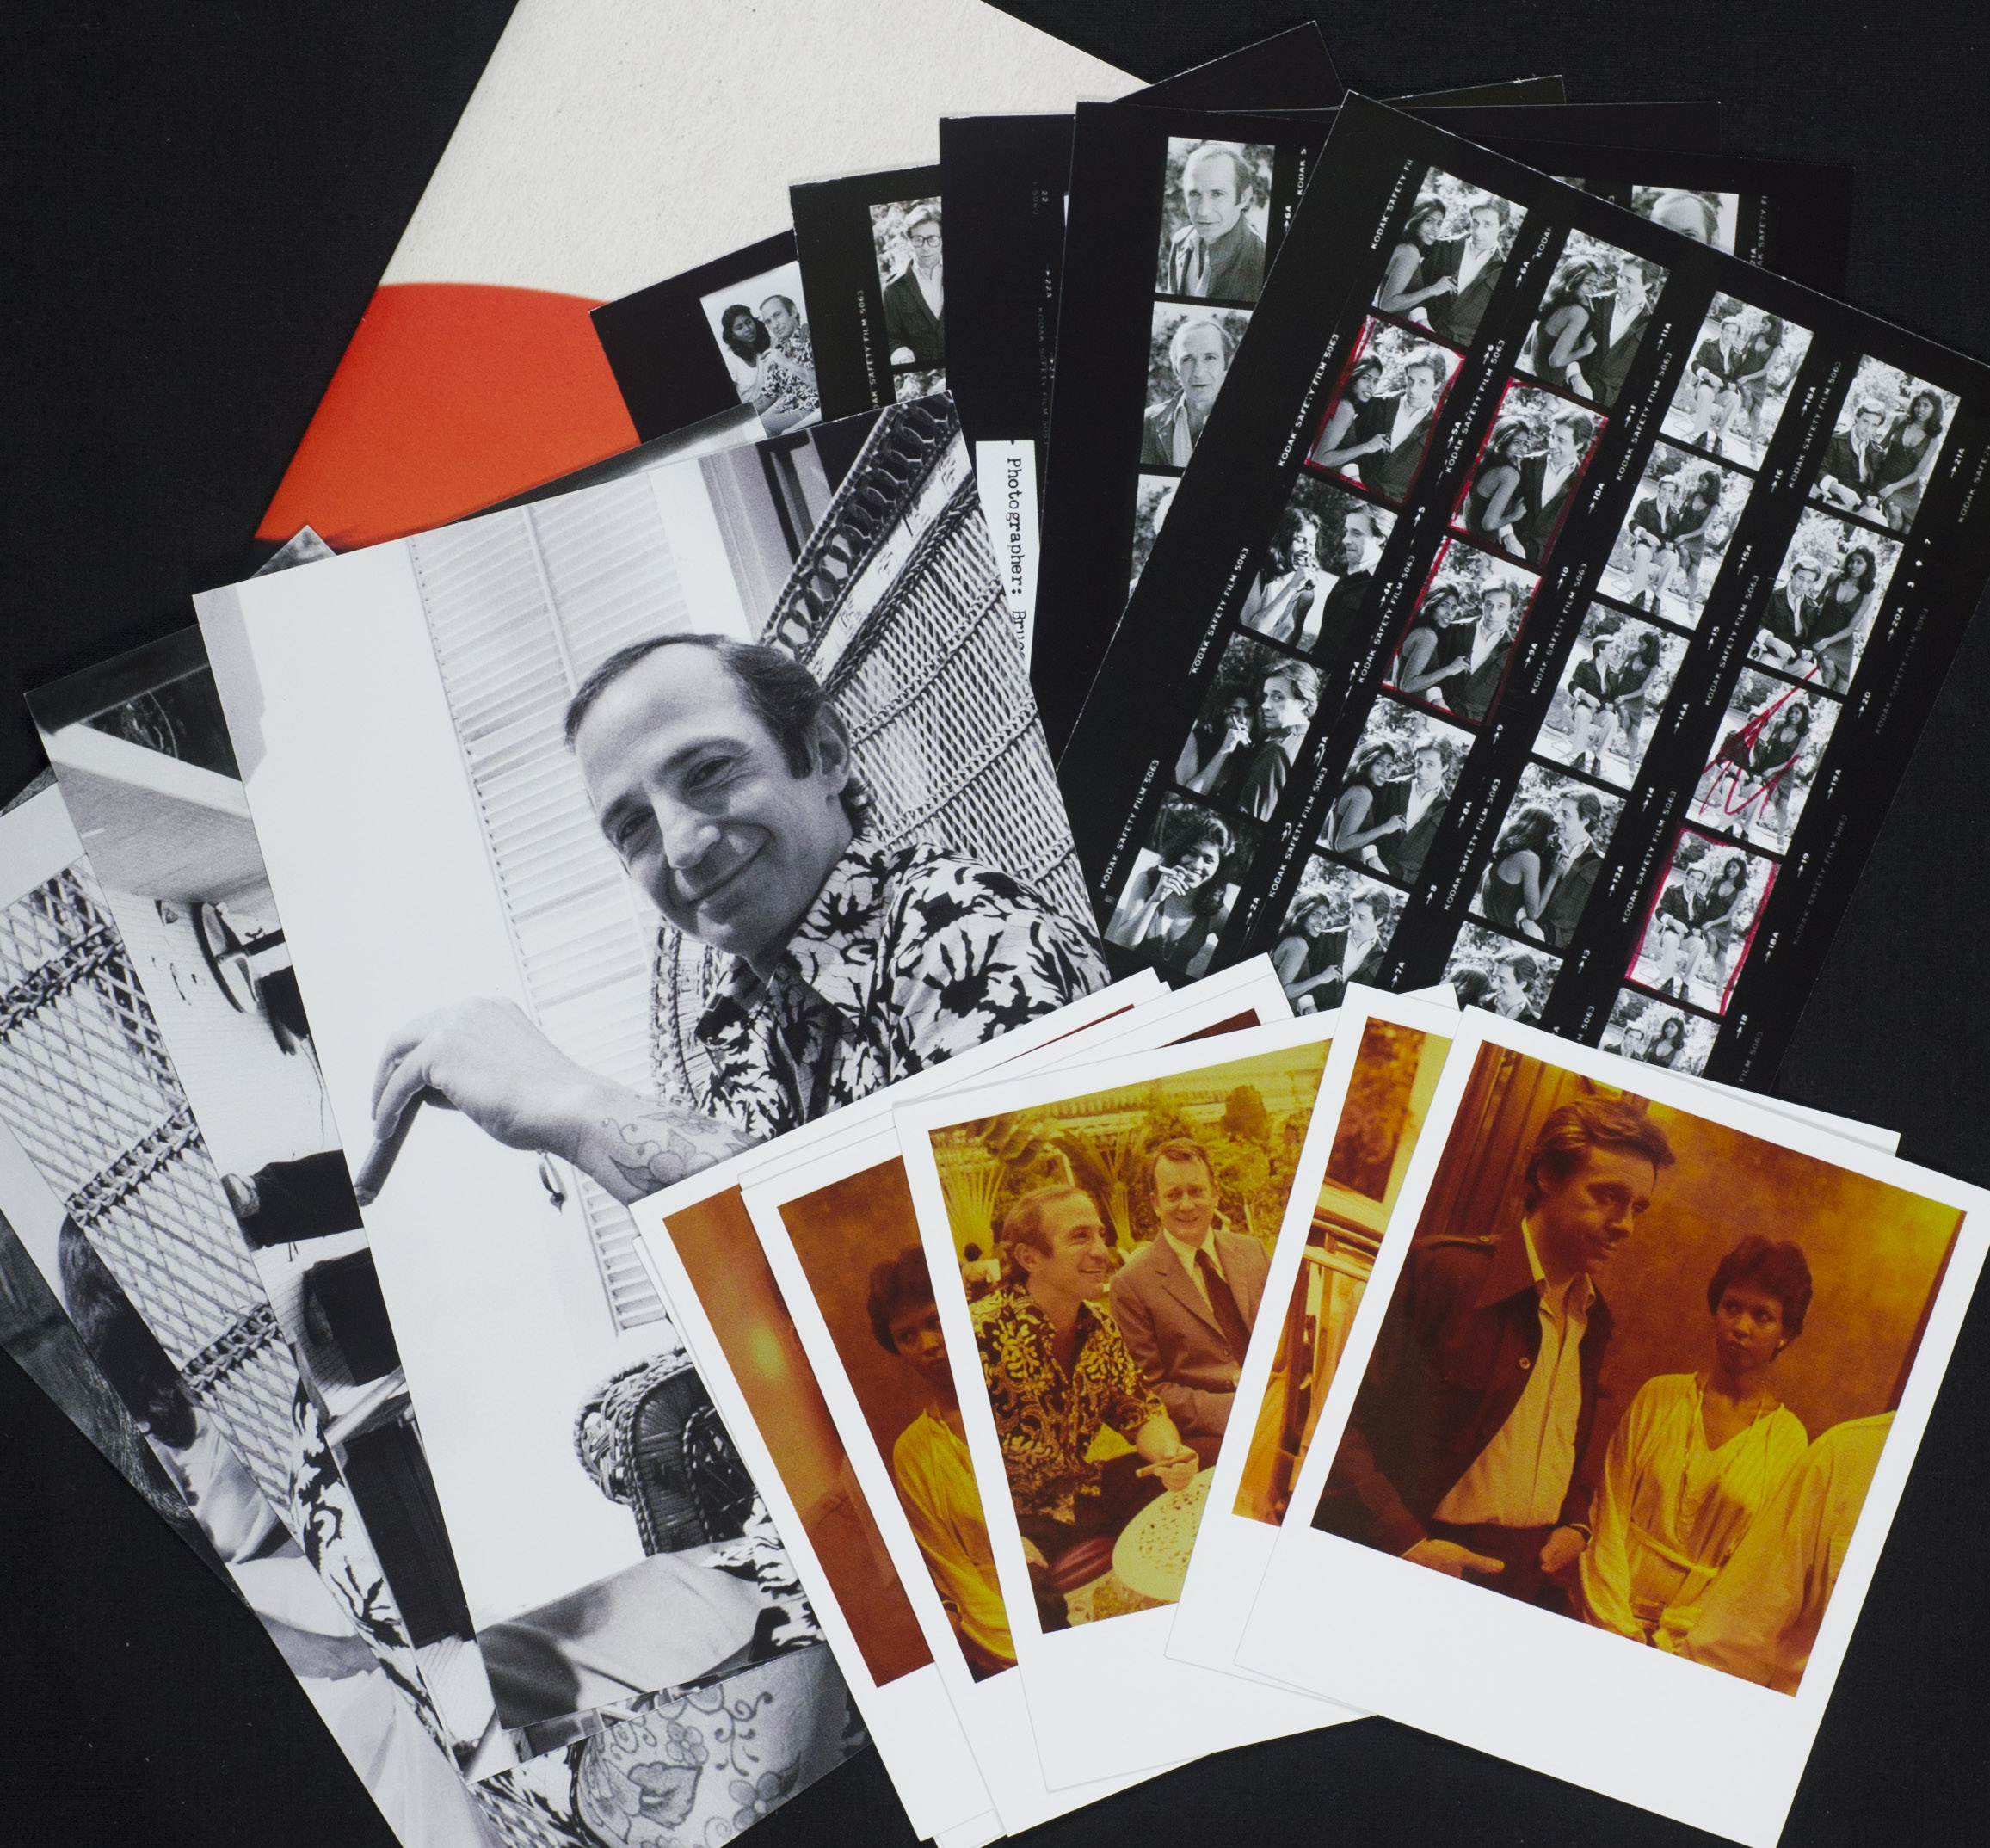 Photos, contact sheets and Polaroid pictures are arranged on a table top.